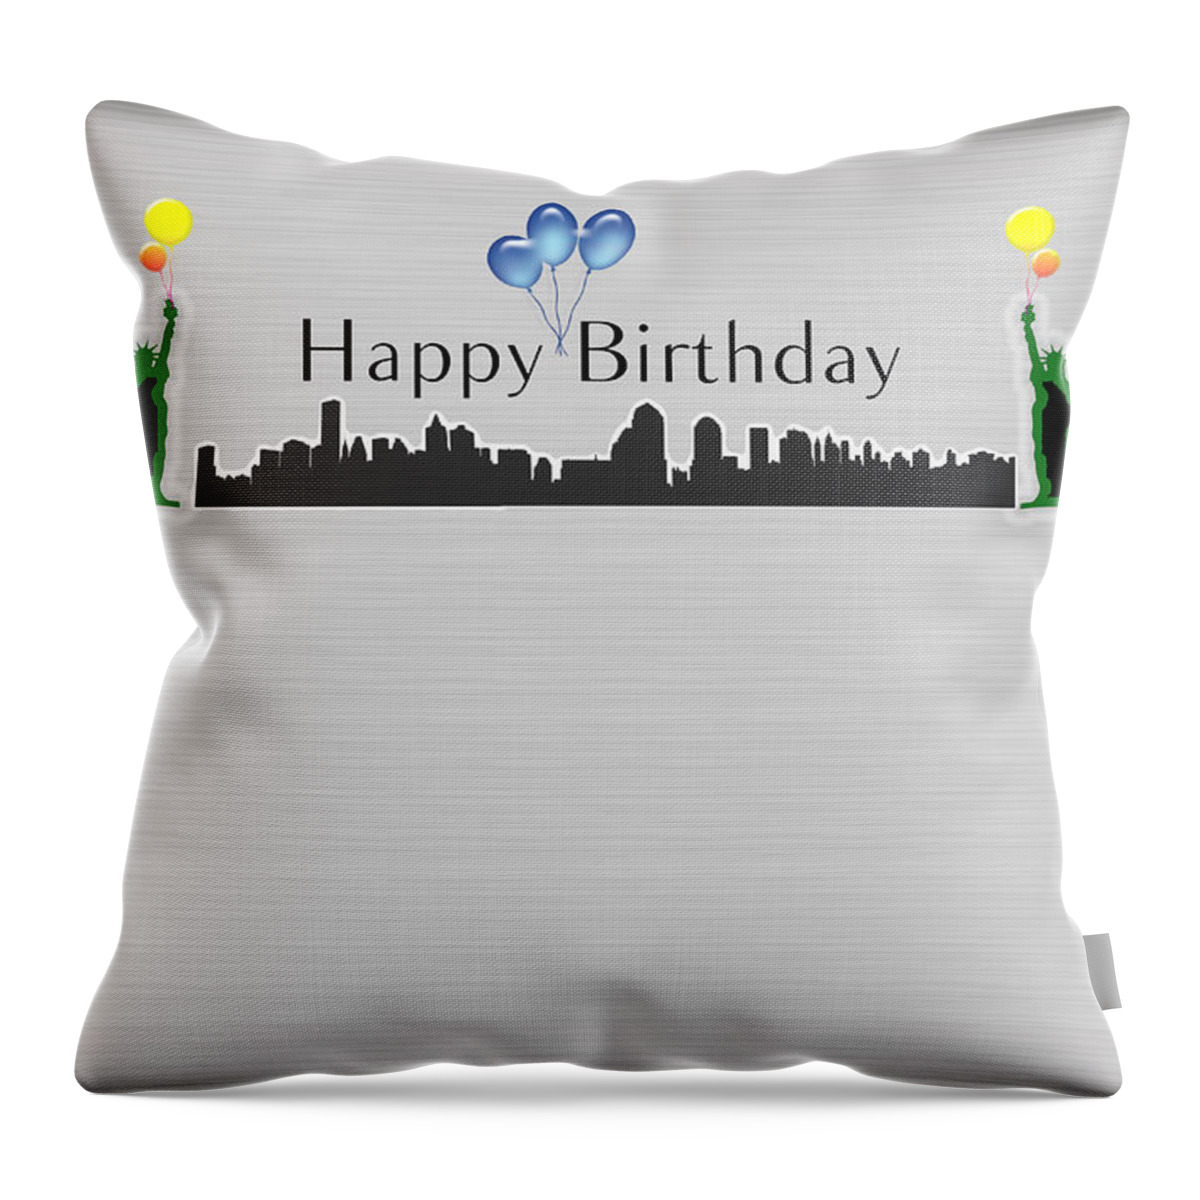 Happy Birthday Throw Pillow featuring the digital art Happy Birthday Card - New York City - Statue of Liberty by Becca Buecher